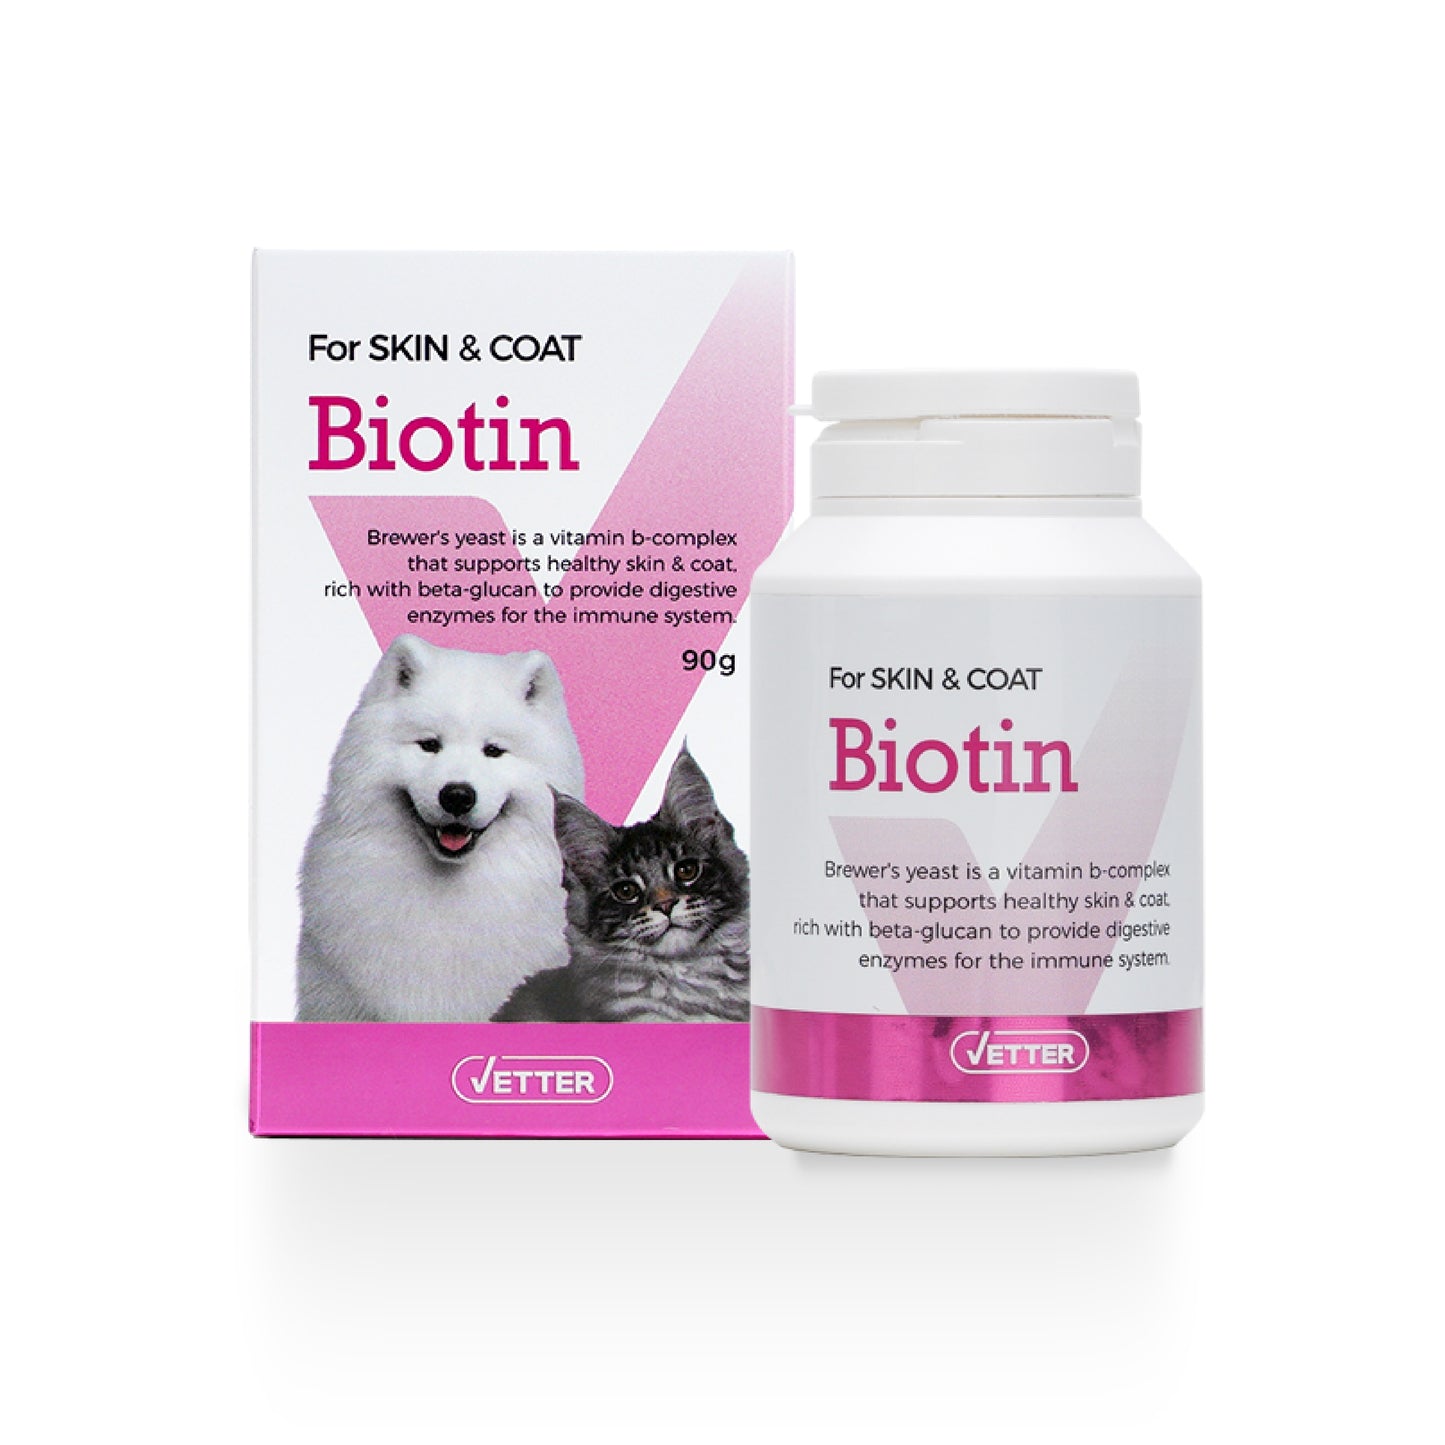 Vetter Biotin Supplement for Dogs and Cats 90g (Skin & Coat Care)